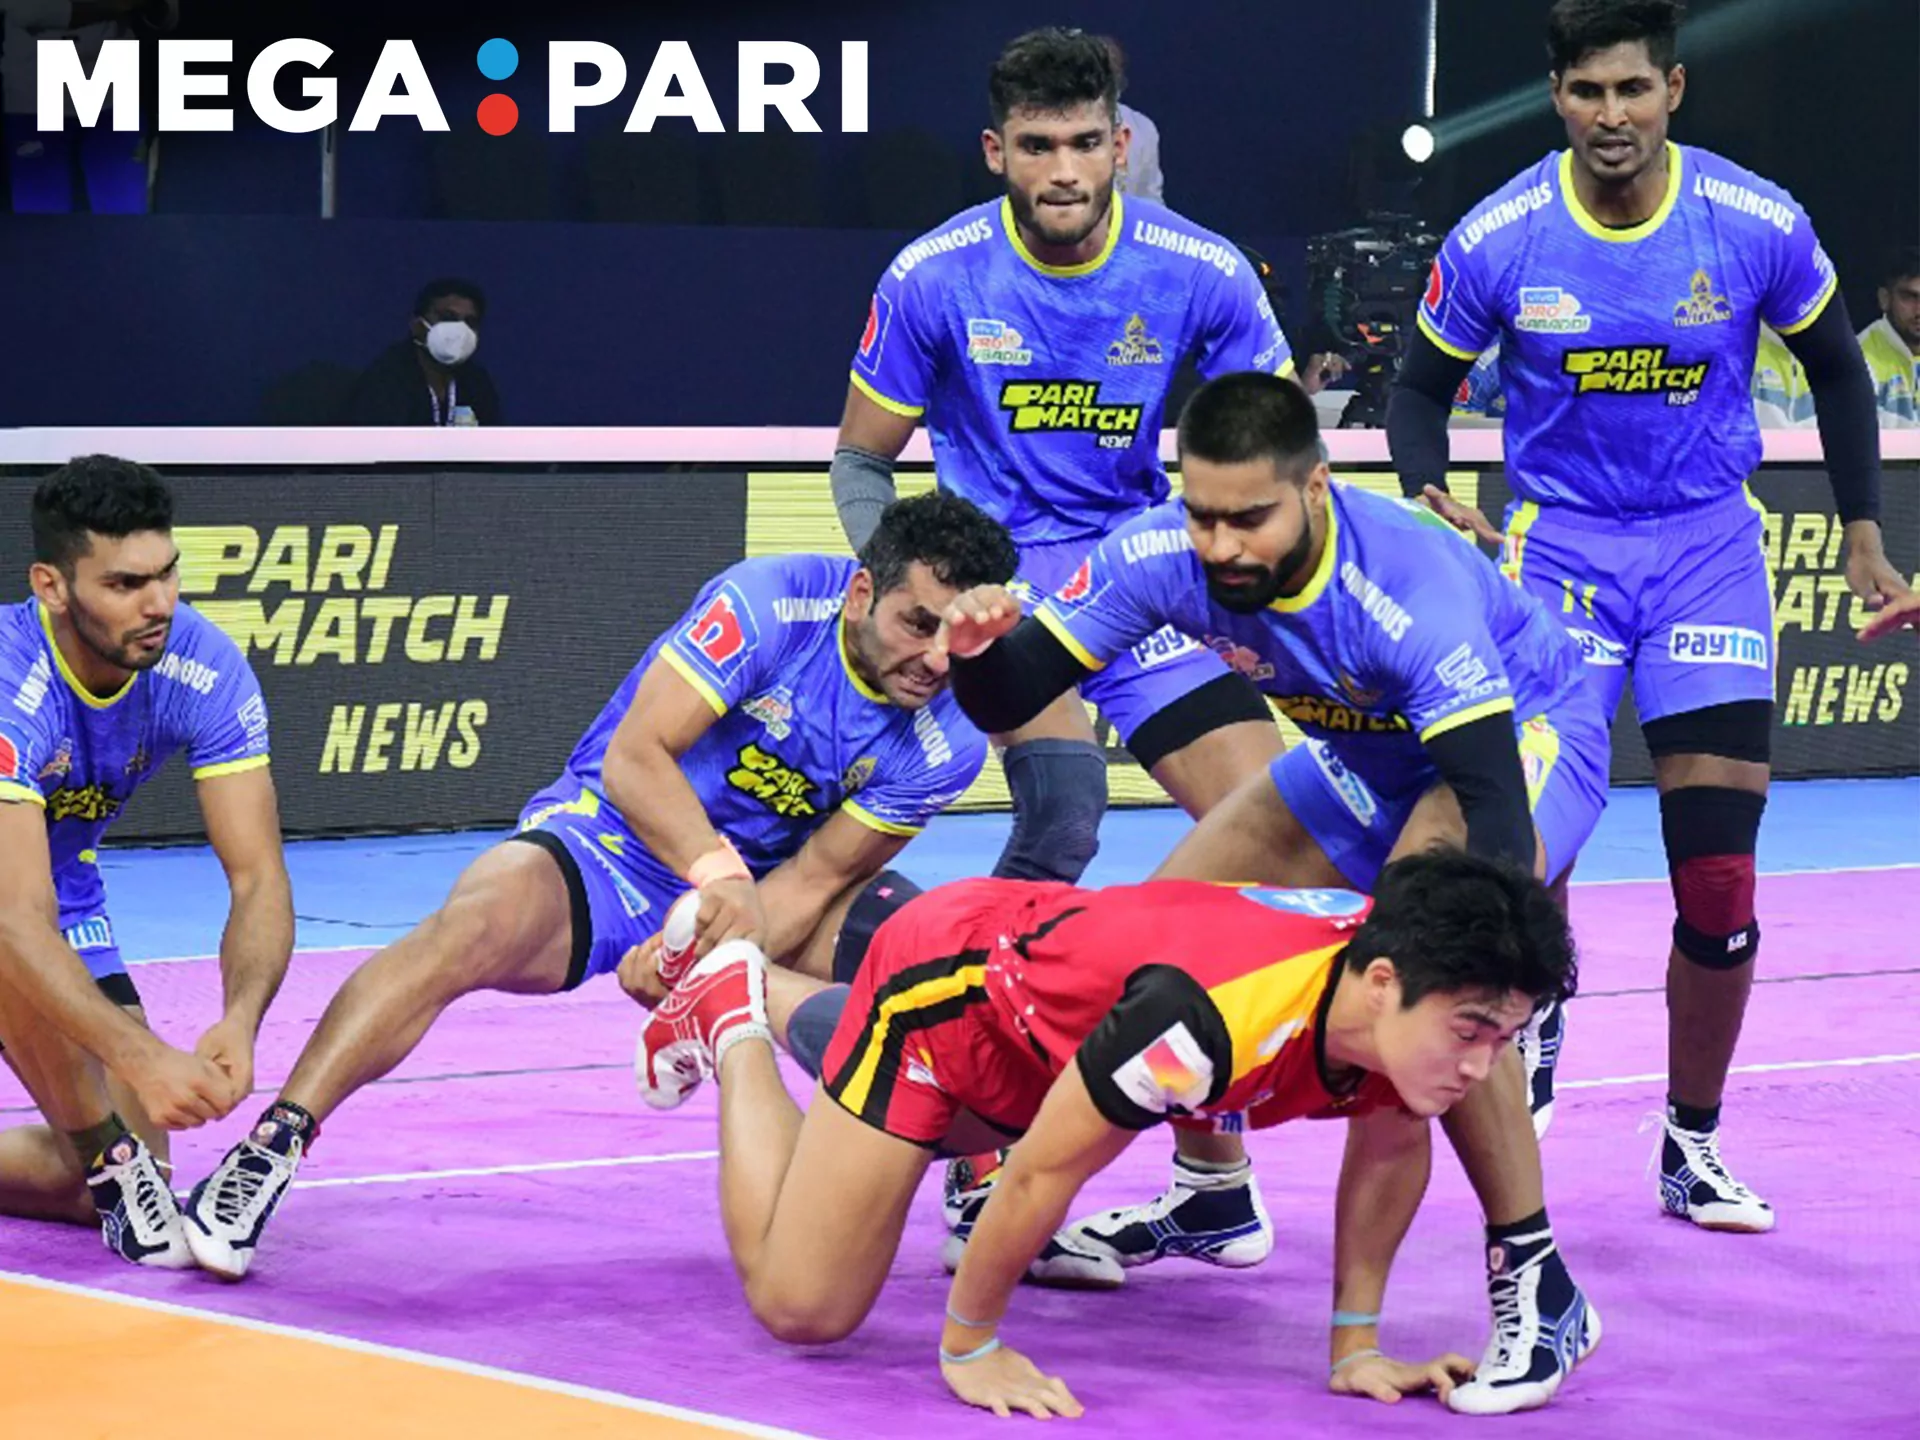 Place bets on kabaddi in your Megapari app.